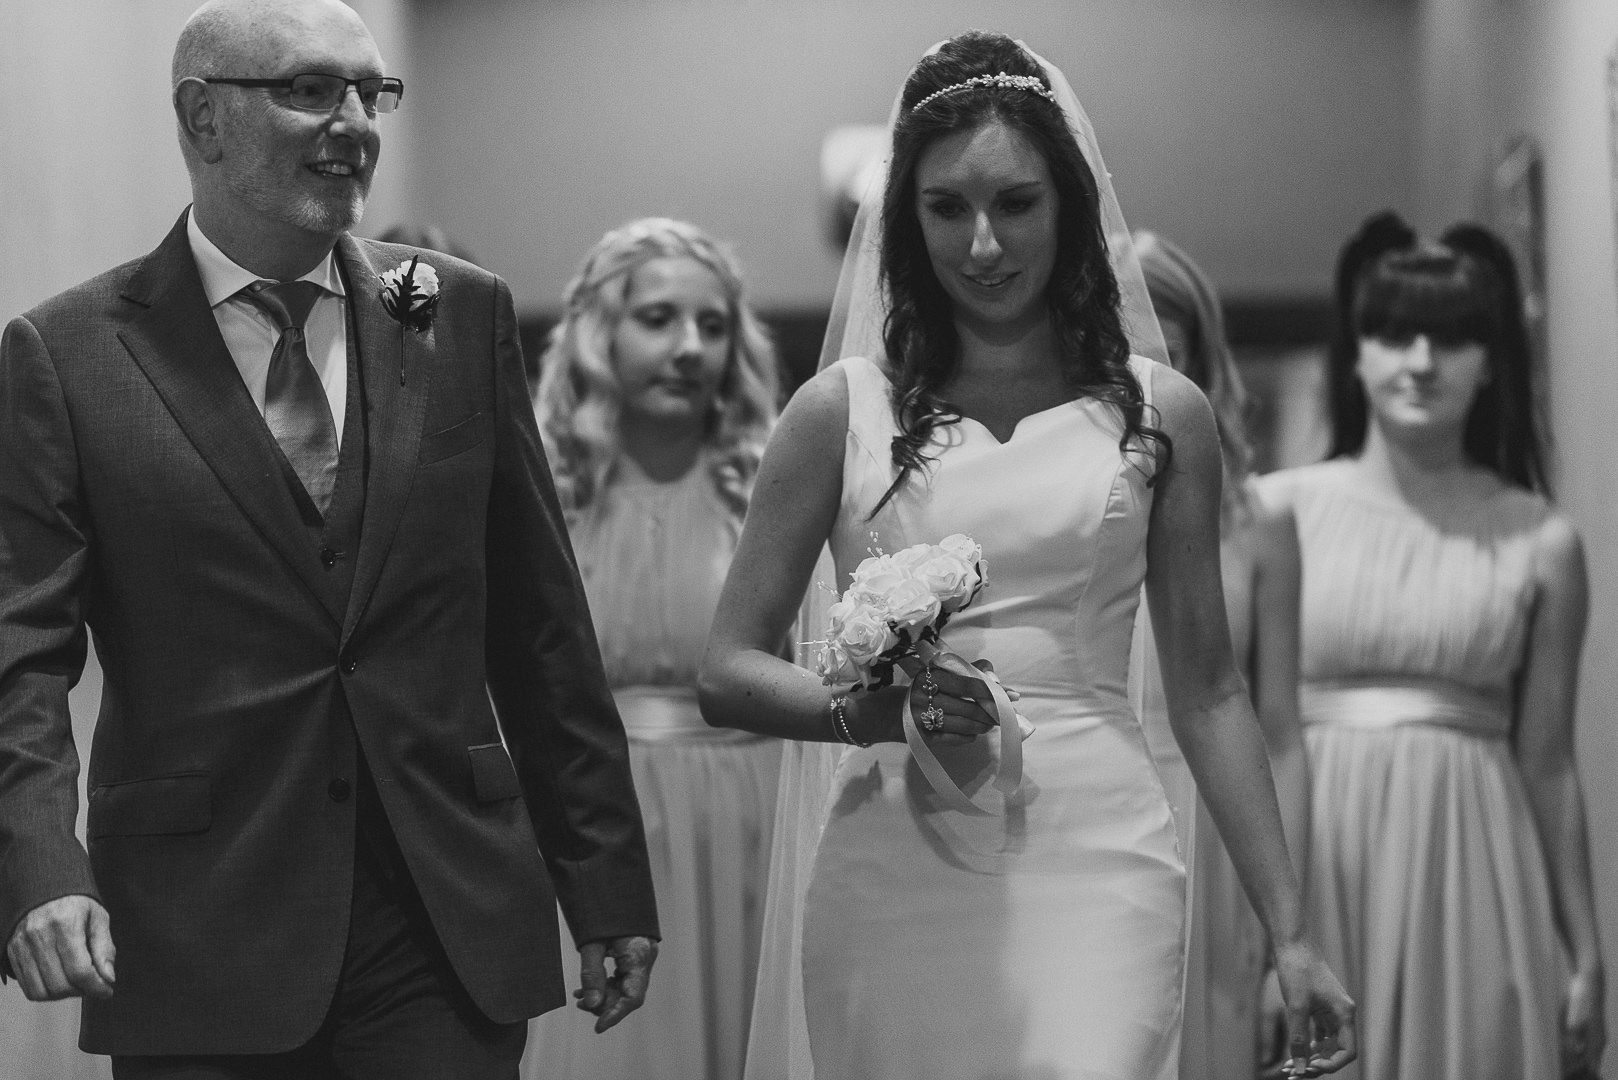 The bride is walking with her father to the ceremony